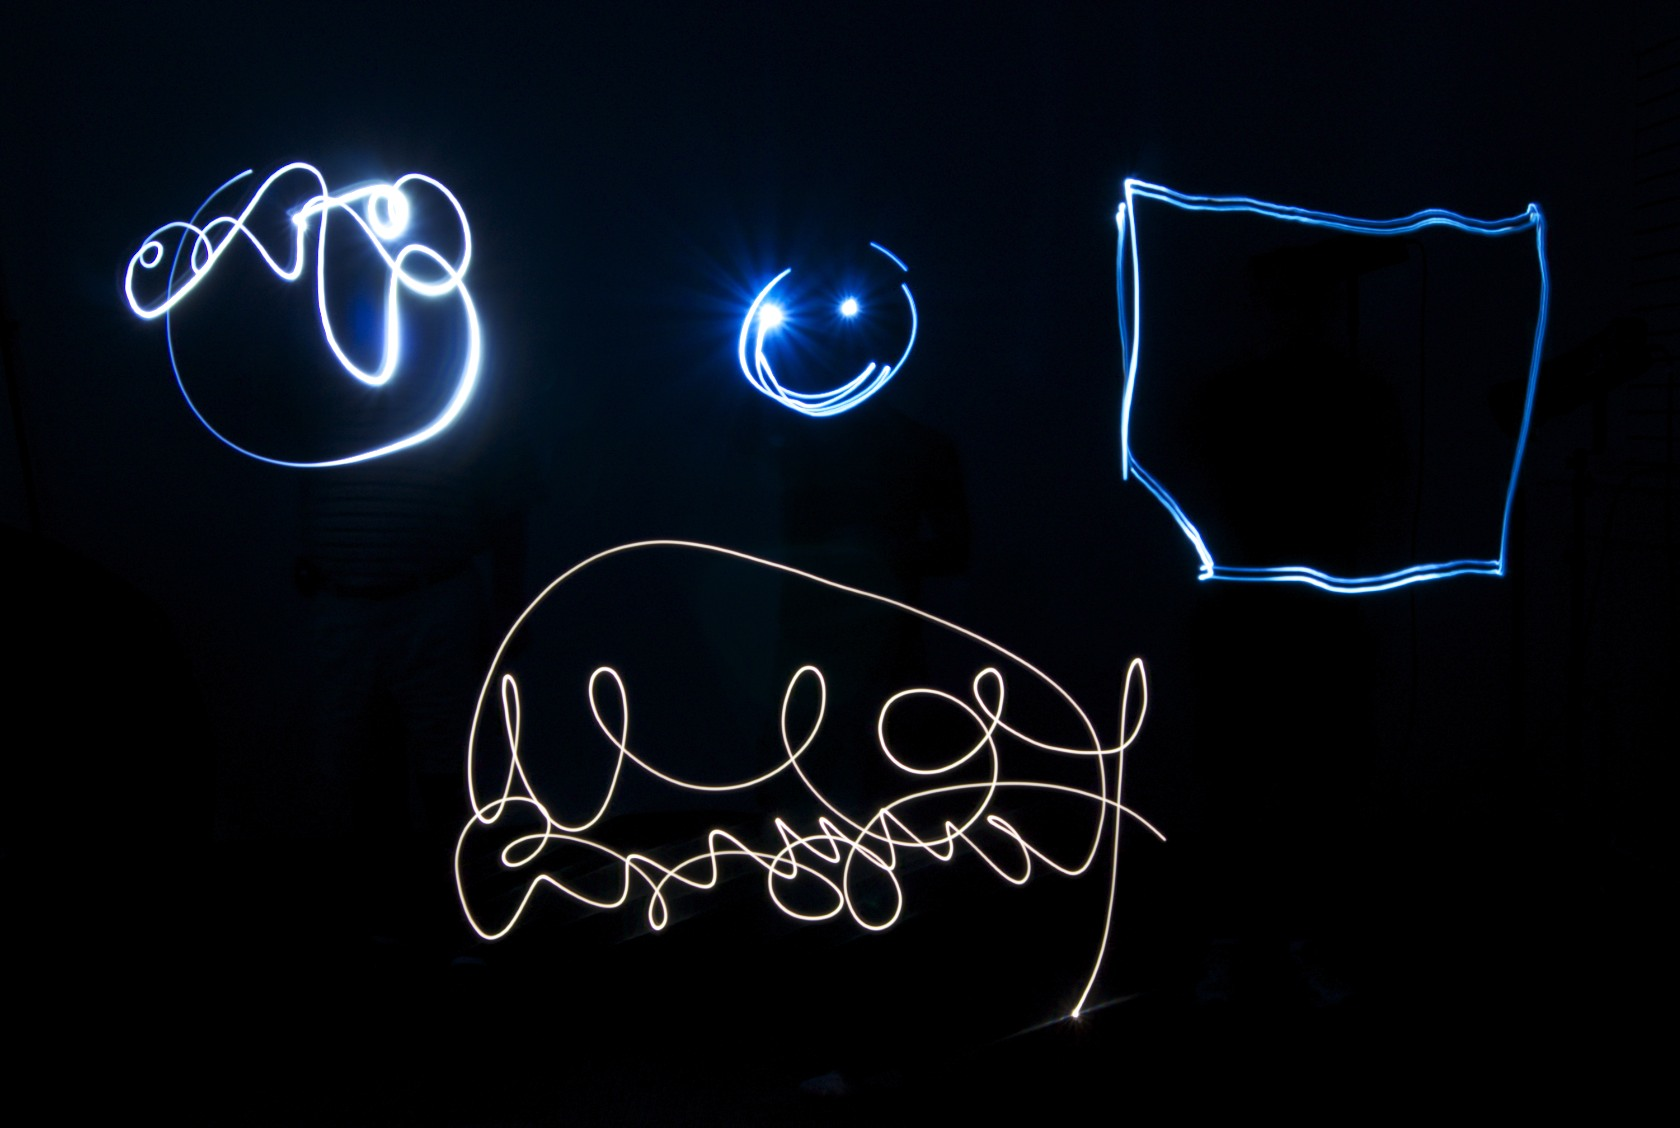 Example of 'free form' painting with light